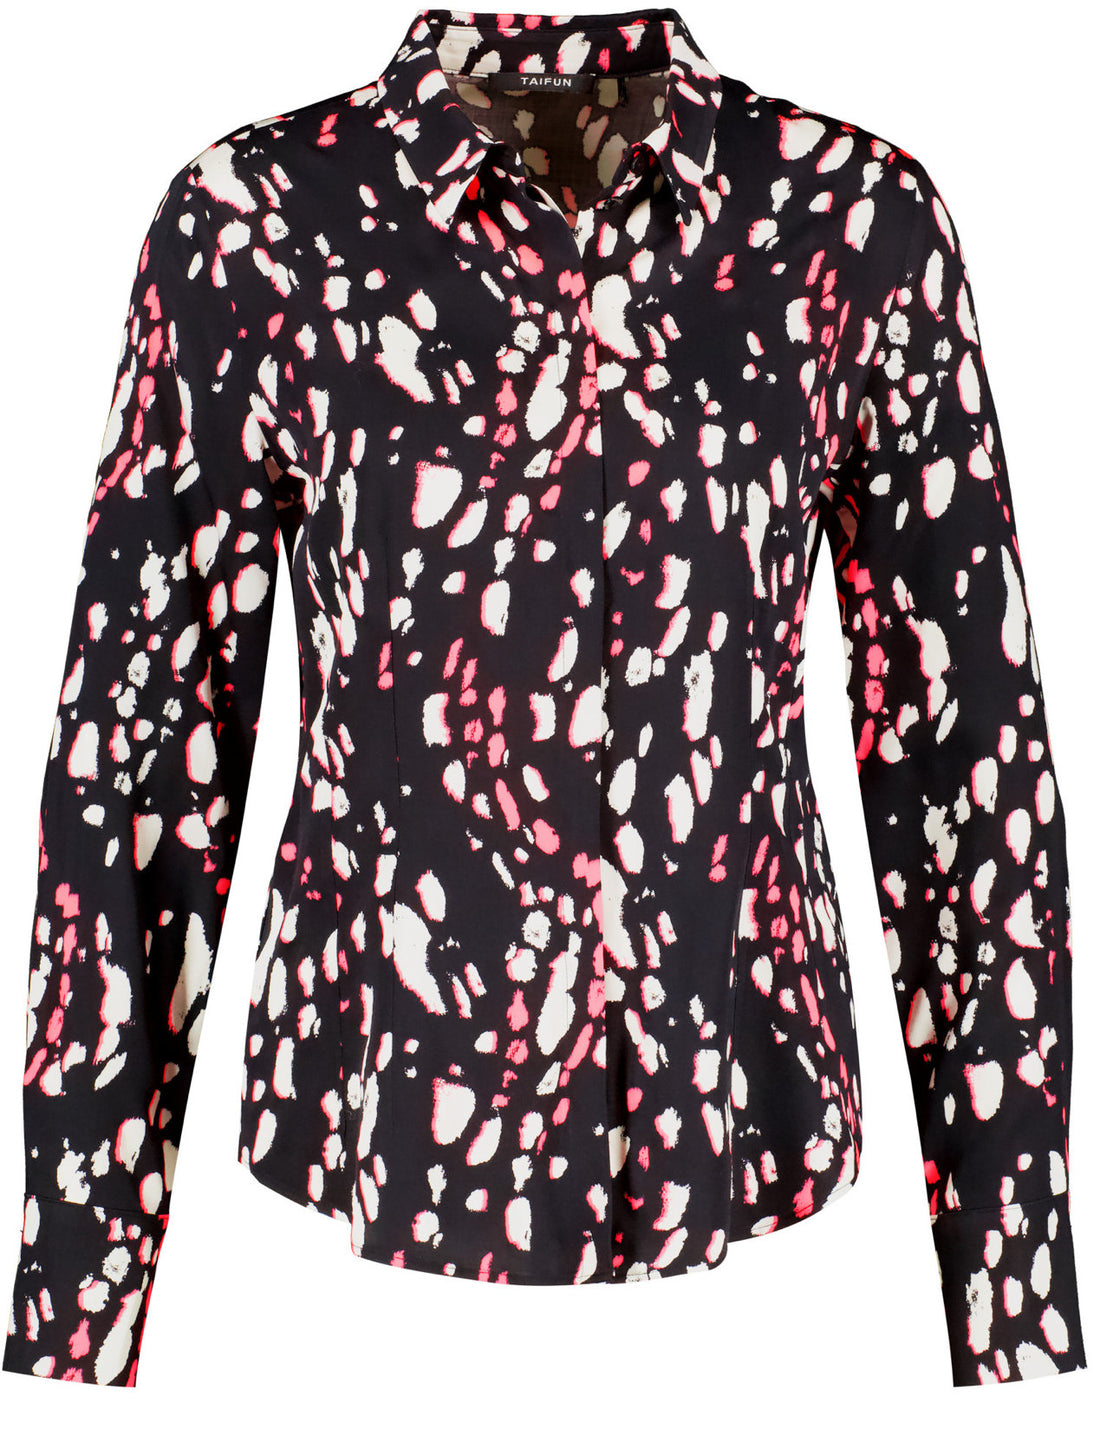 Fitted Shirt Blouse With An All-Over Print_560302-11033_1102_02